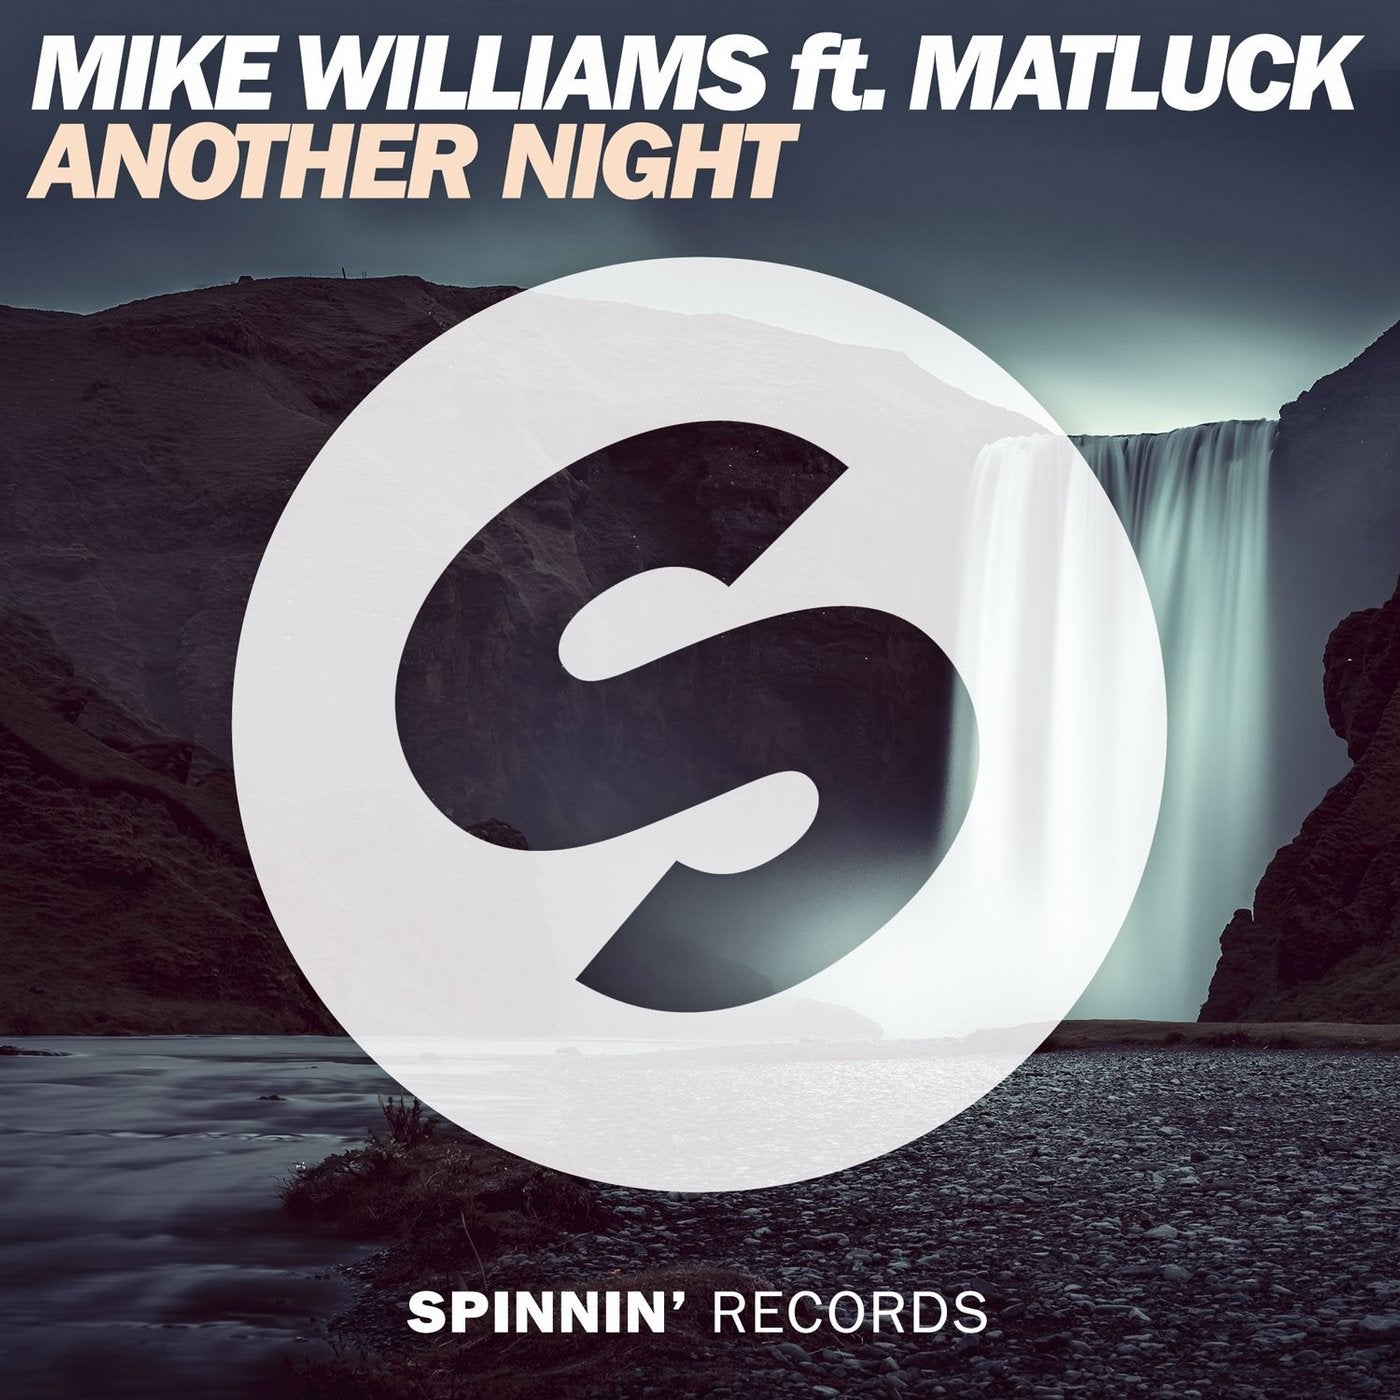 Night mike. Spinnin records. Альбом Spinnin records. Mike Williams. Another Night.